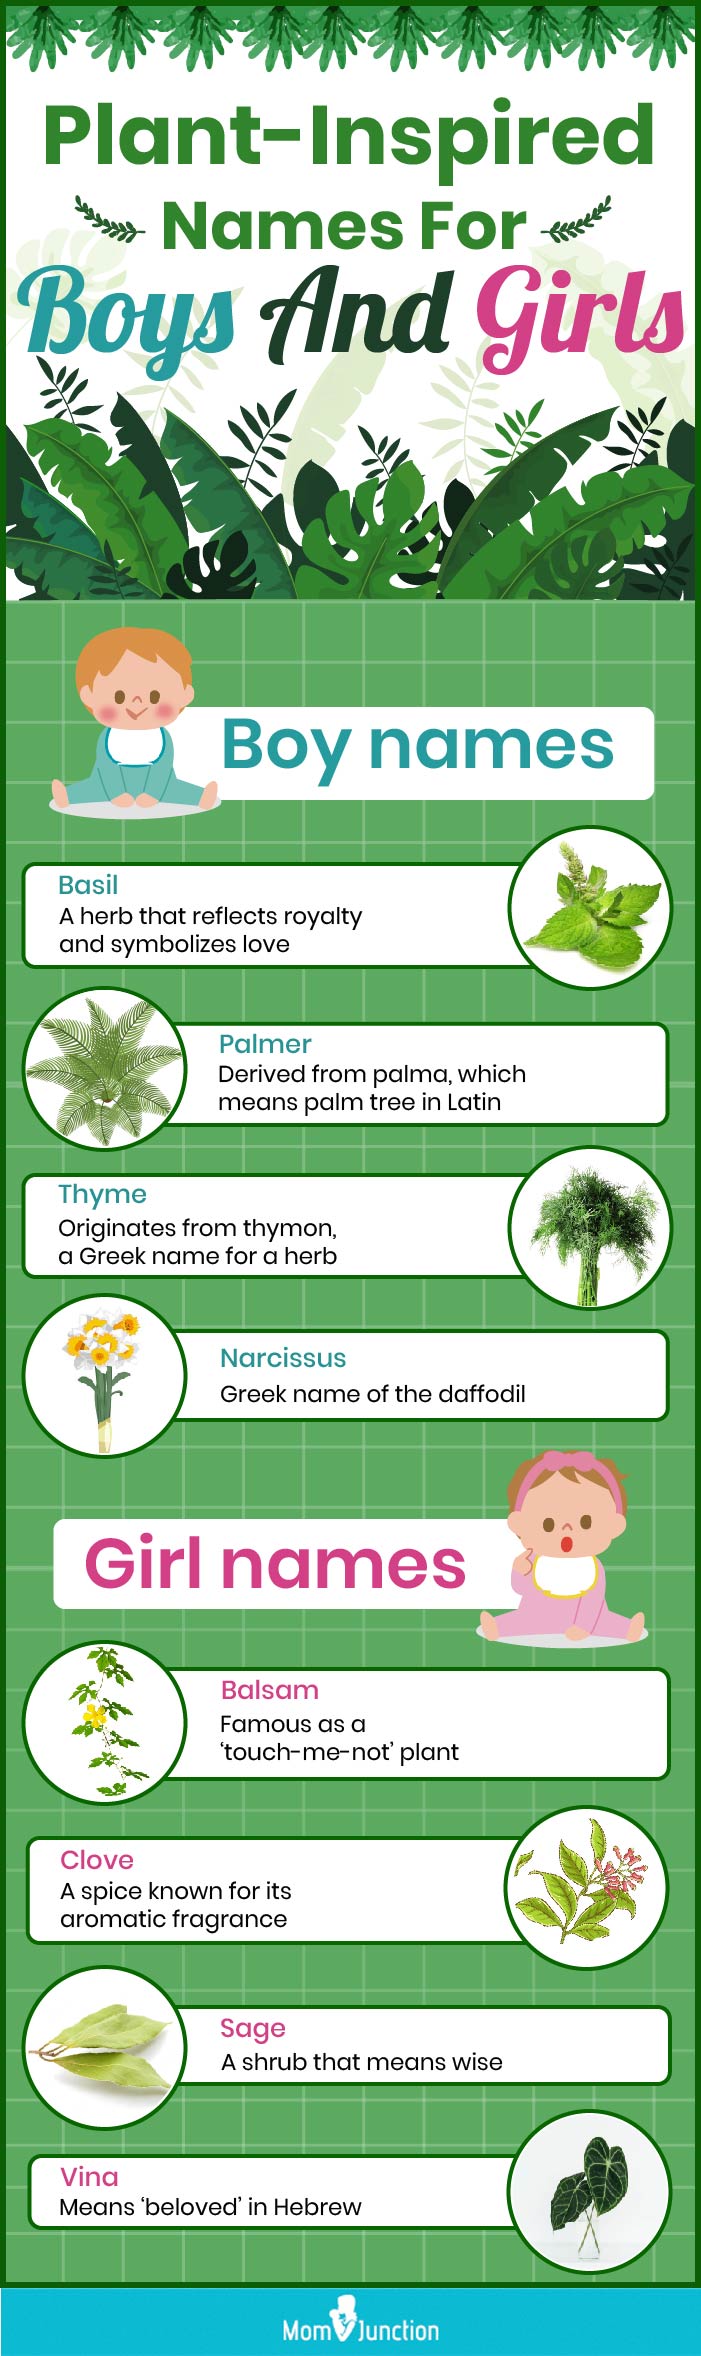 plant inspired names for boys and girls (infographic)